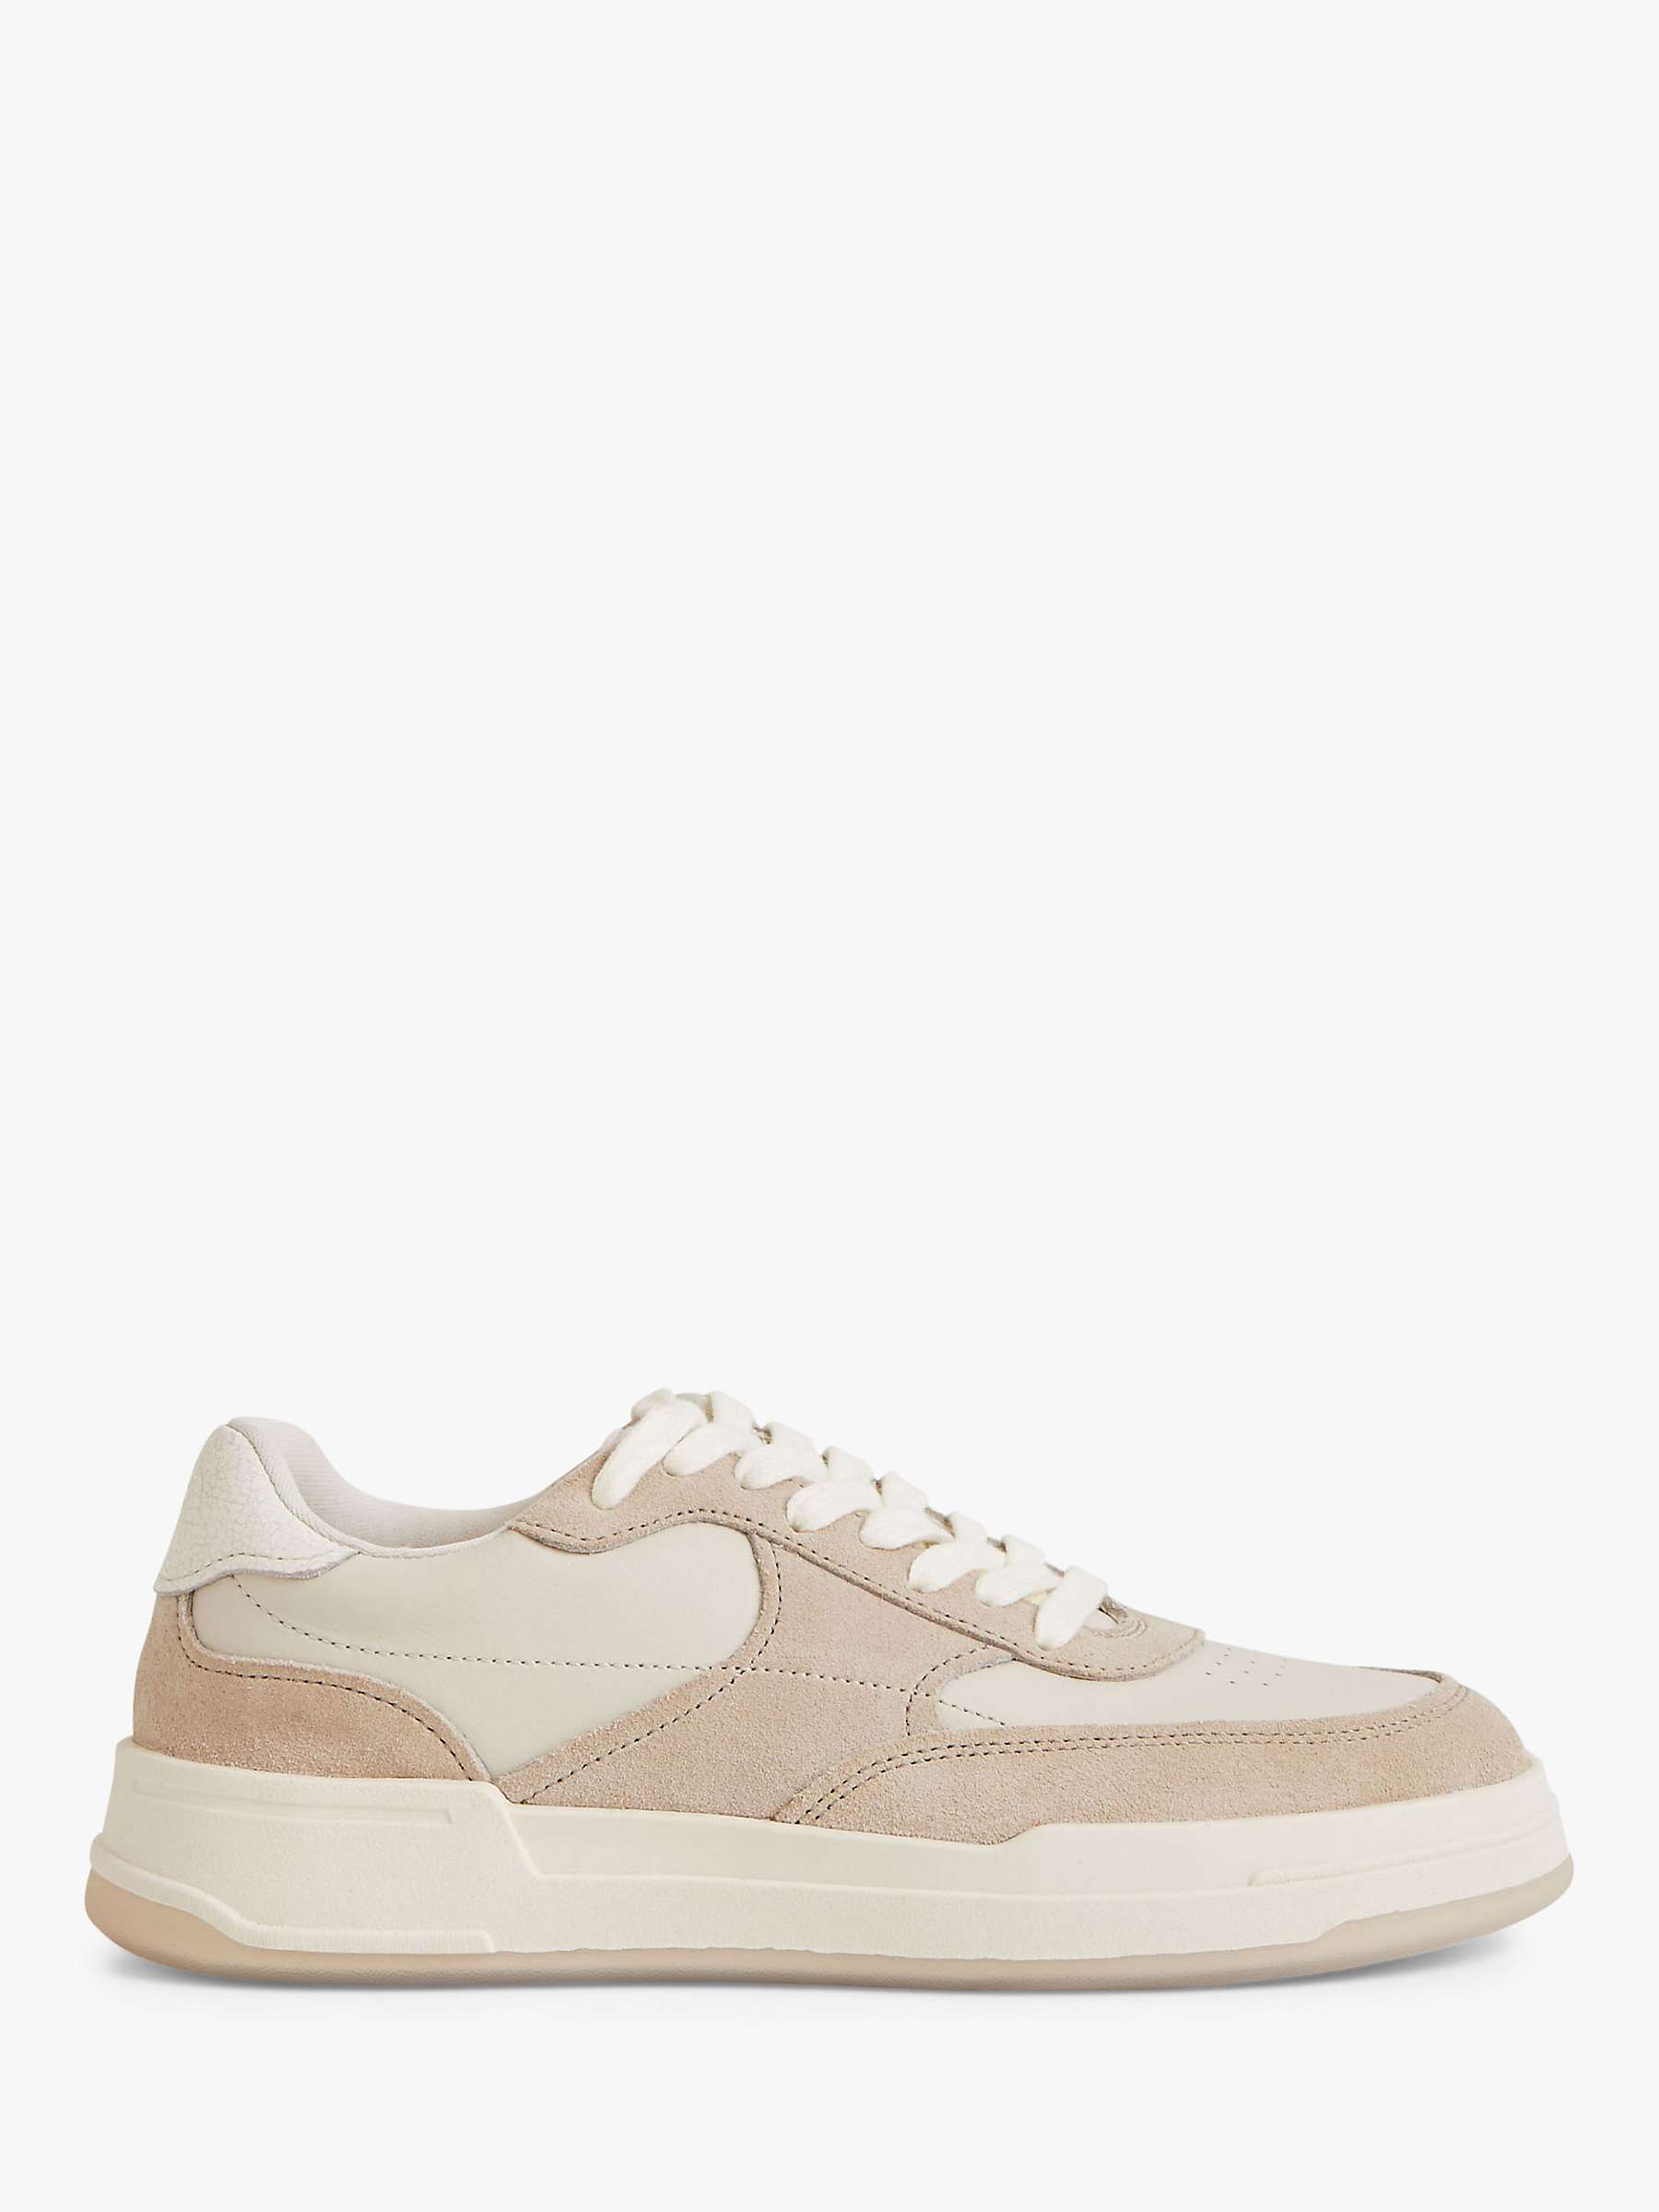 Buy Vagabond Shoemakers Selena Leather & Suede Trainers, Off White/Cream Online at johnlewis.com